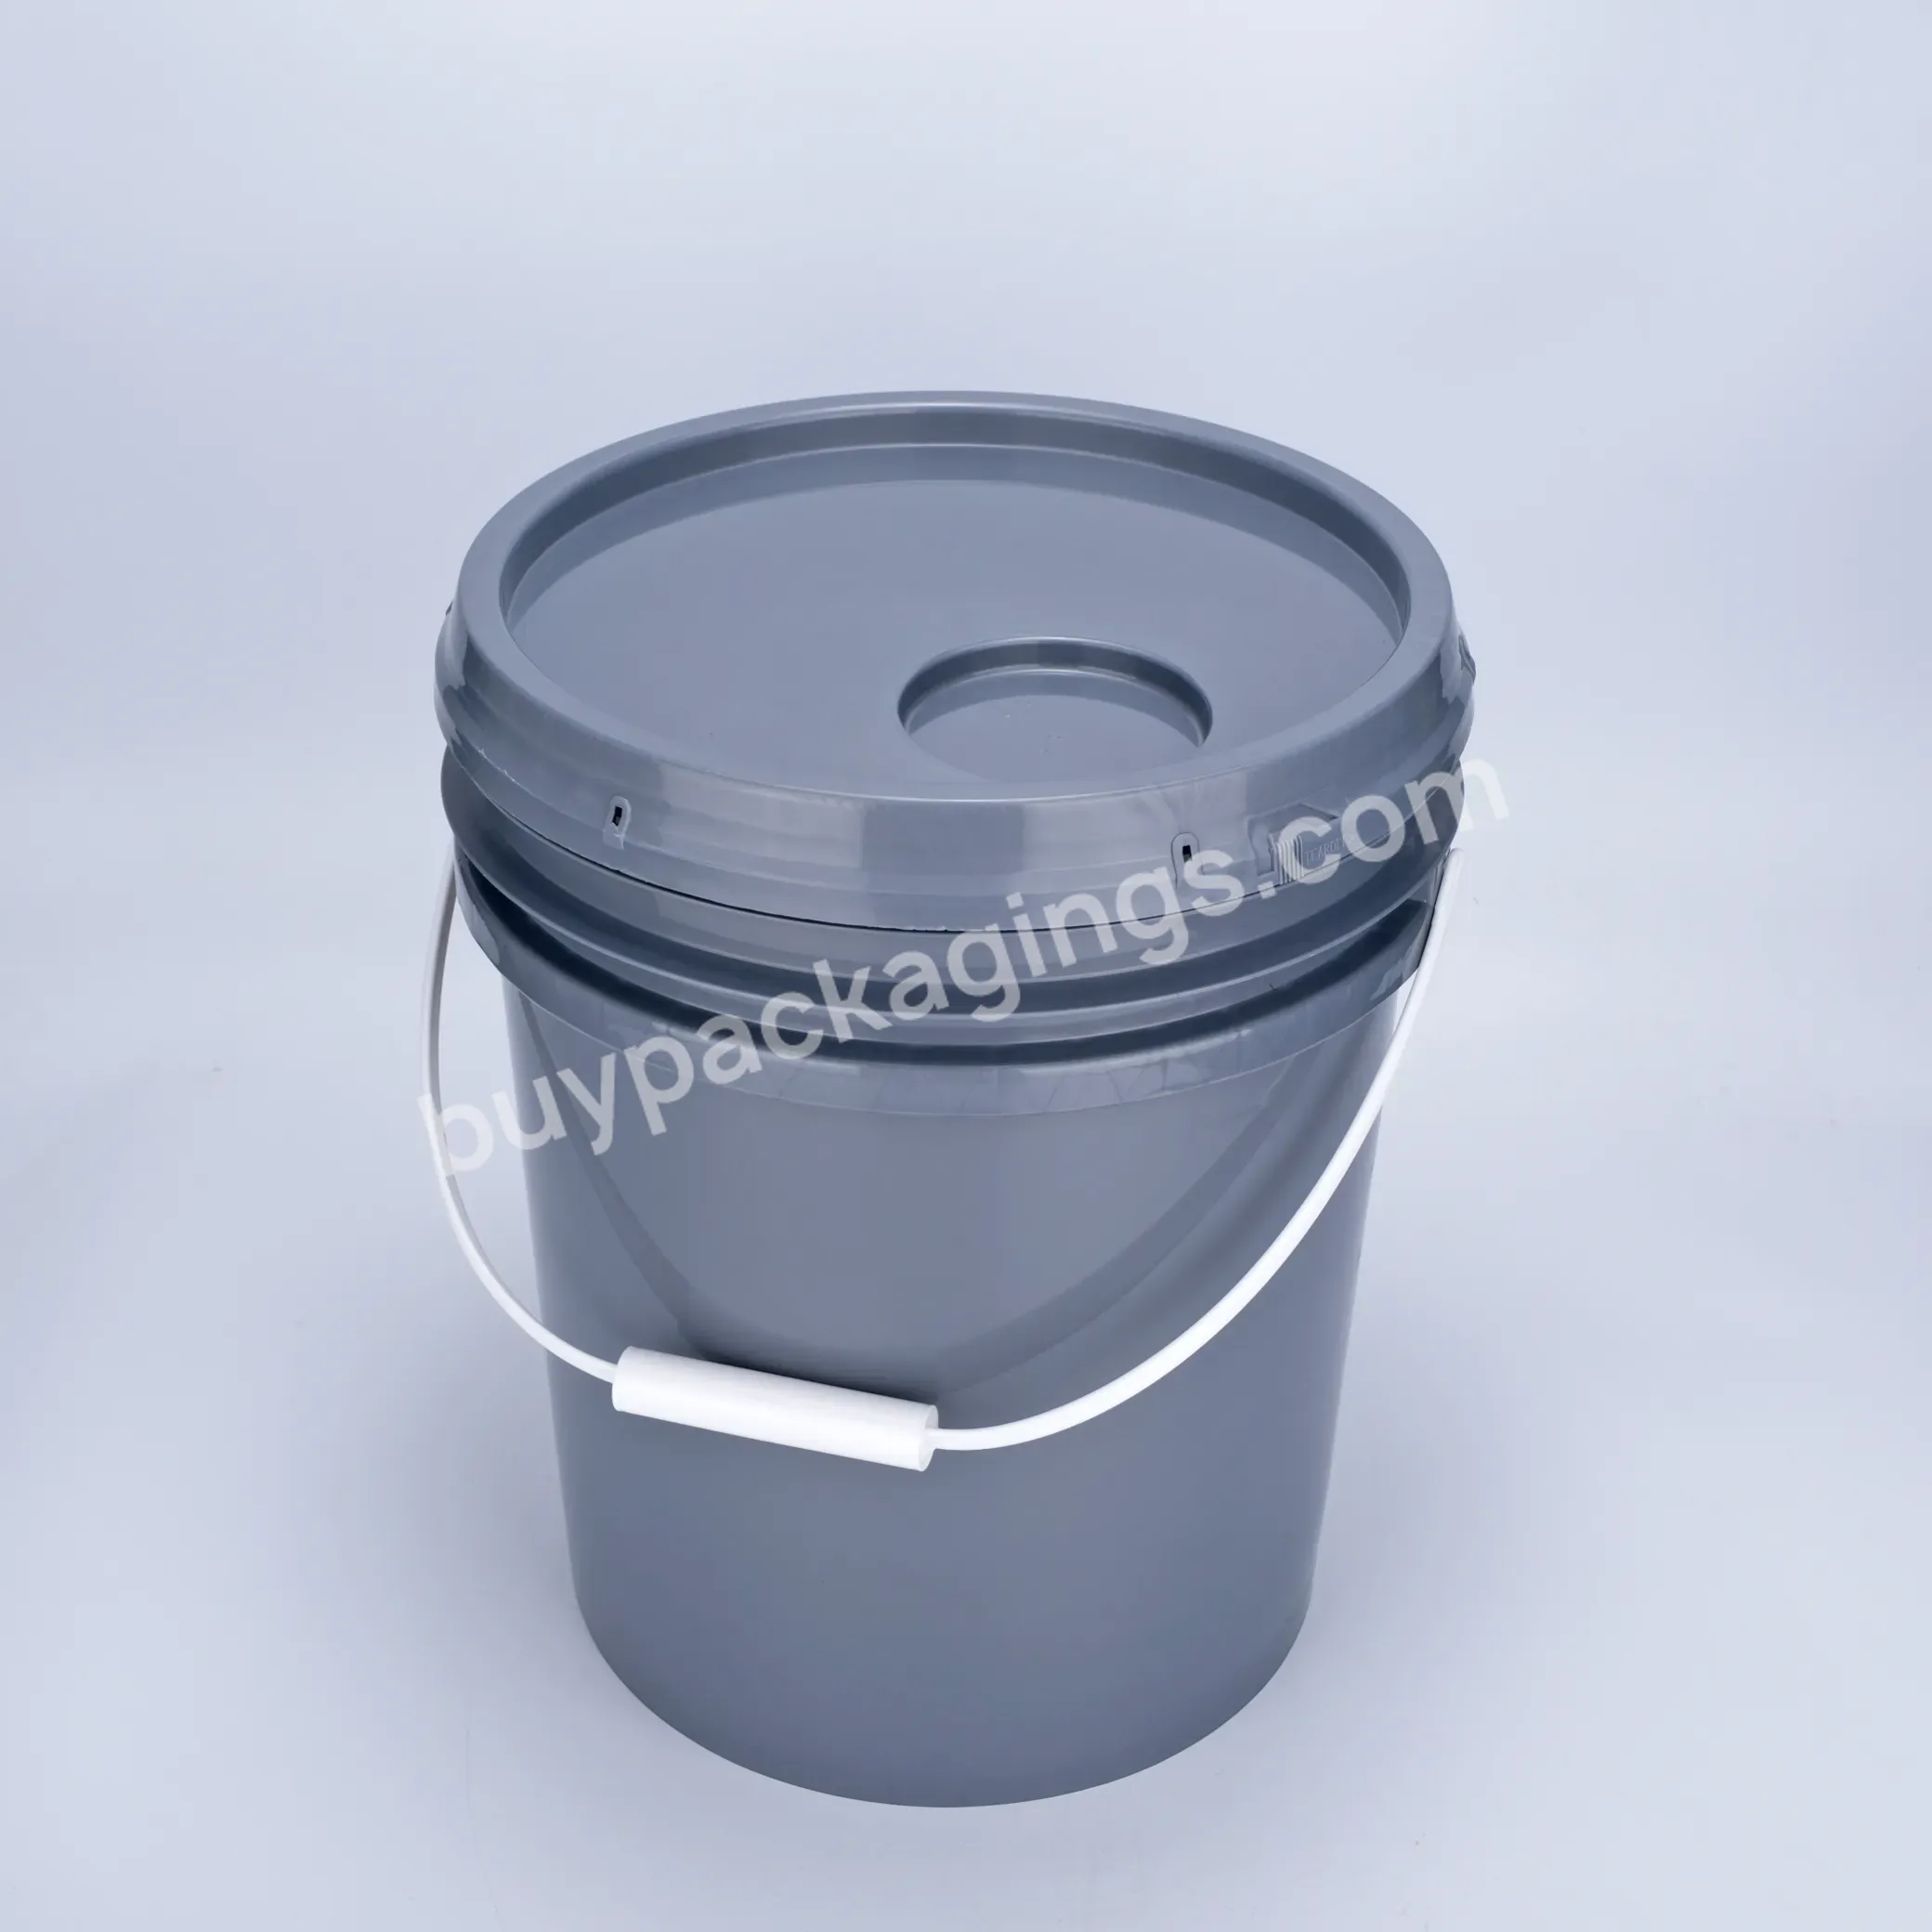 Factory Hot Sale Wholesale Color Customized Plastic Bucket For Container 20l With Handle Plastic Bucket - Buy Plastic Bucket,Plastic Bucket 20 Liter,Plastic Bucket With Handle.